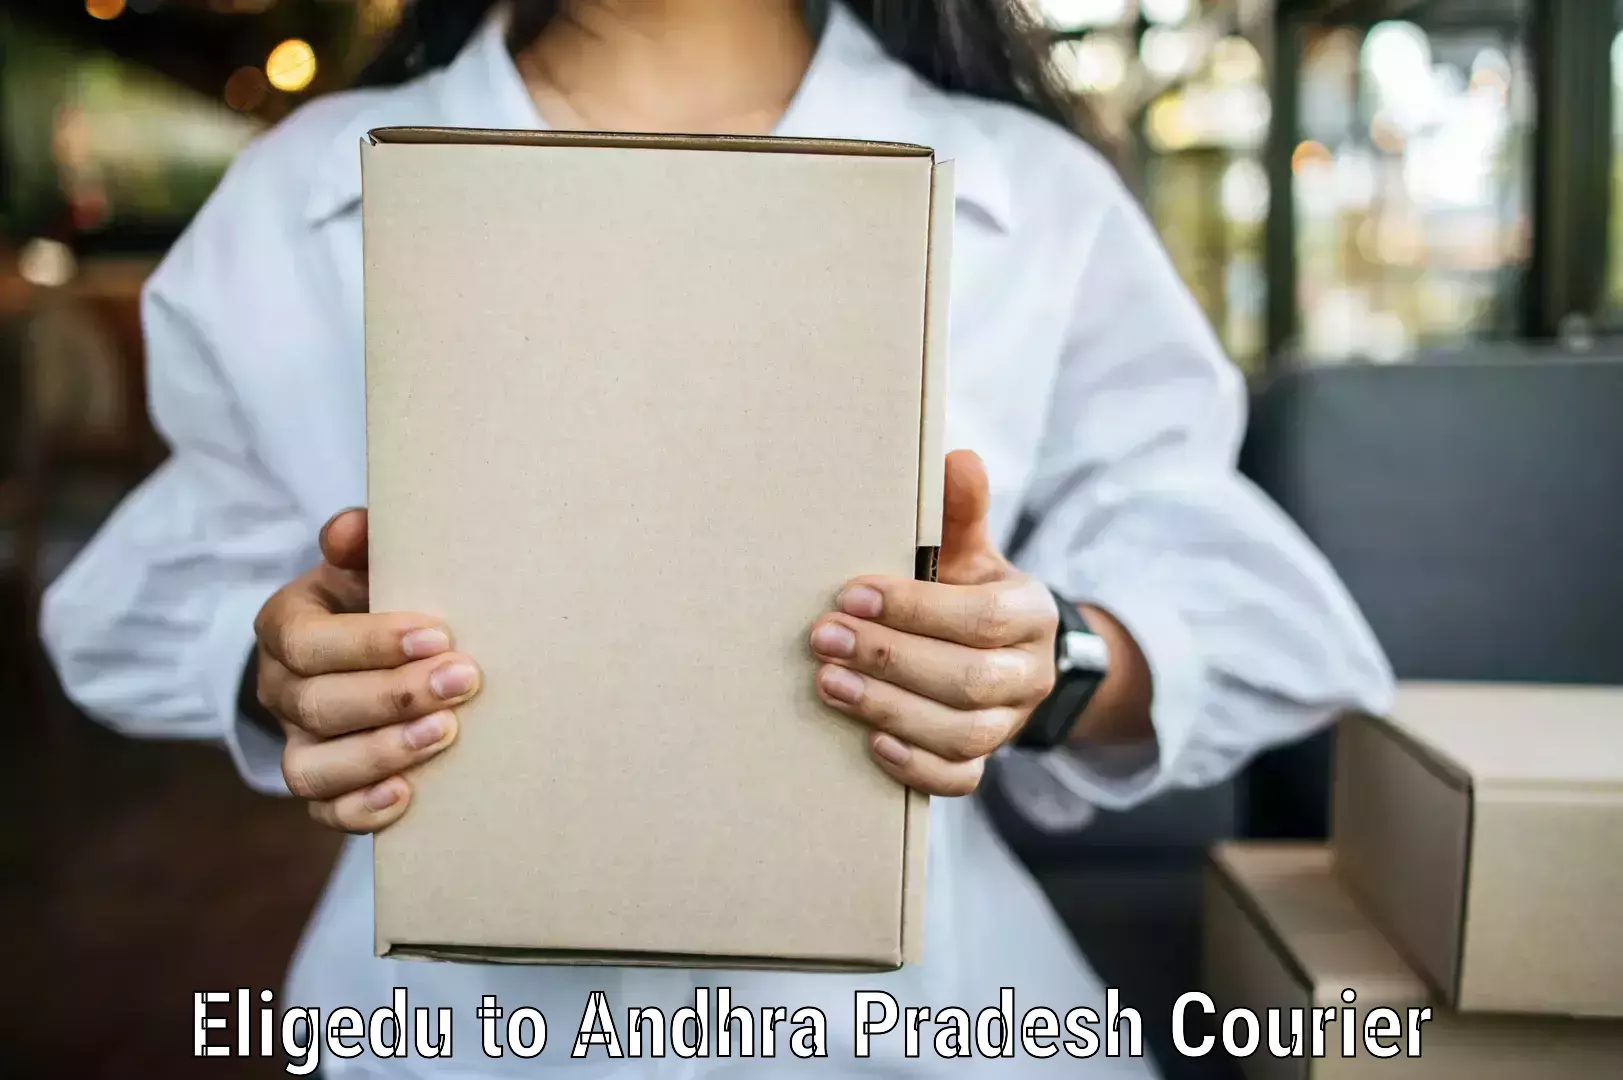 High-quality delivery services Eligedu to Andhra Pradesh